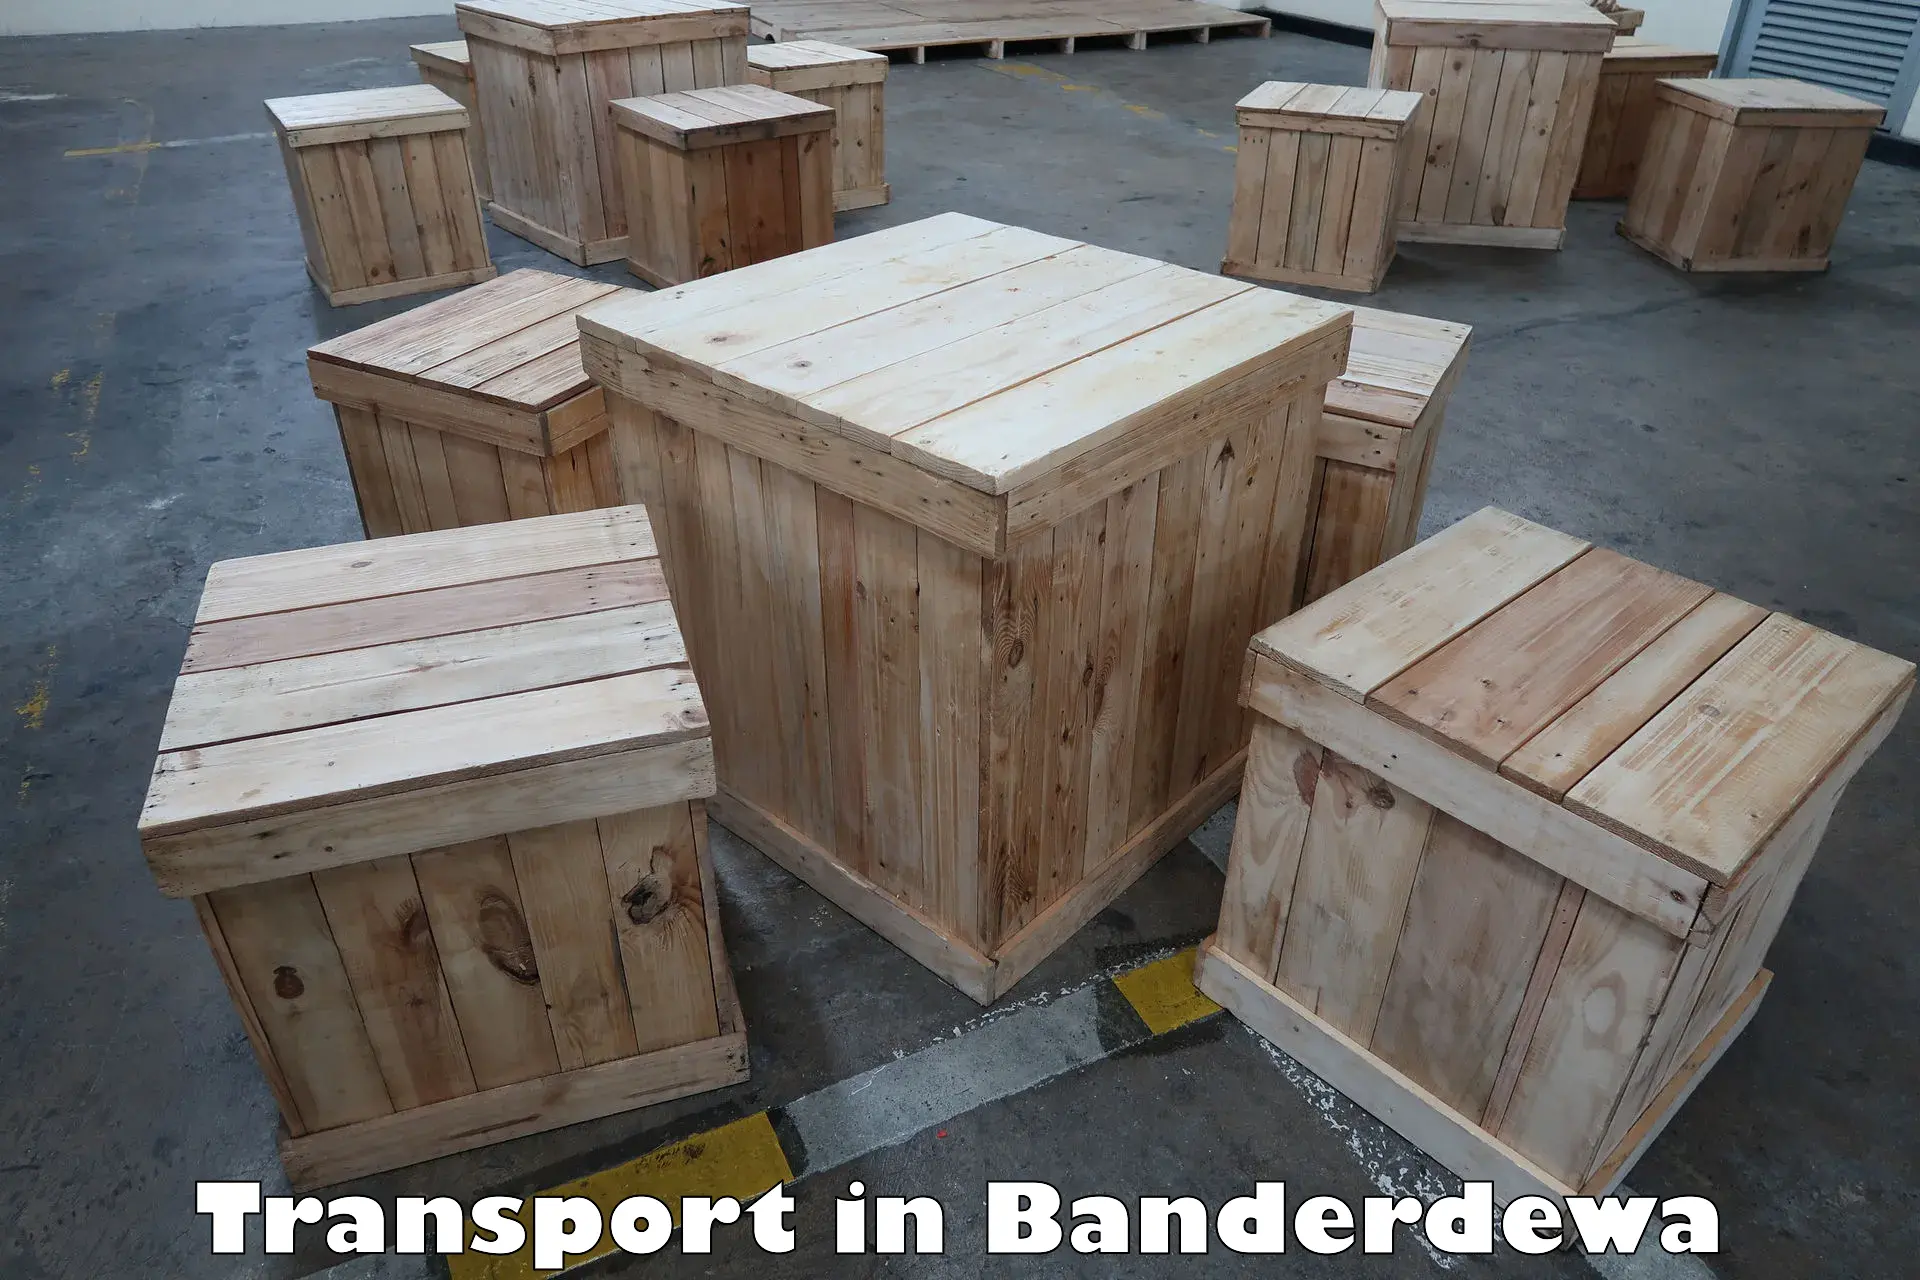 Shipping services in Banderdewa